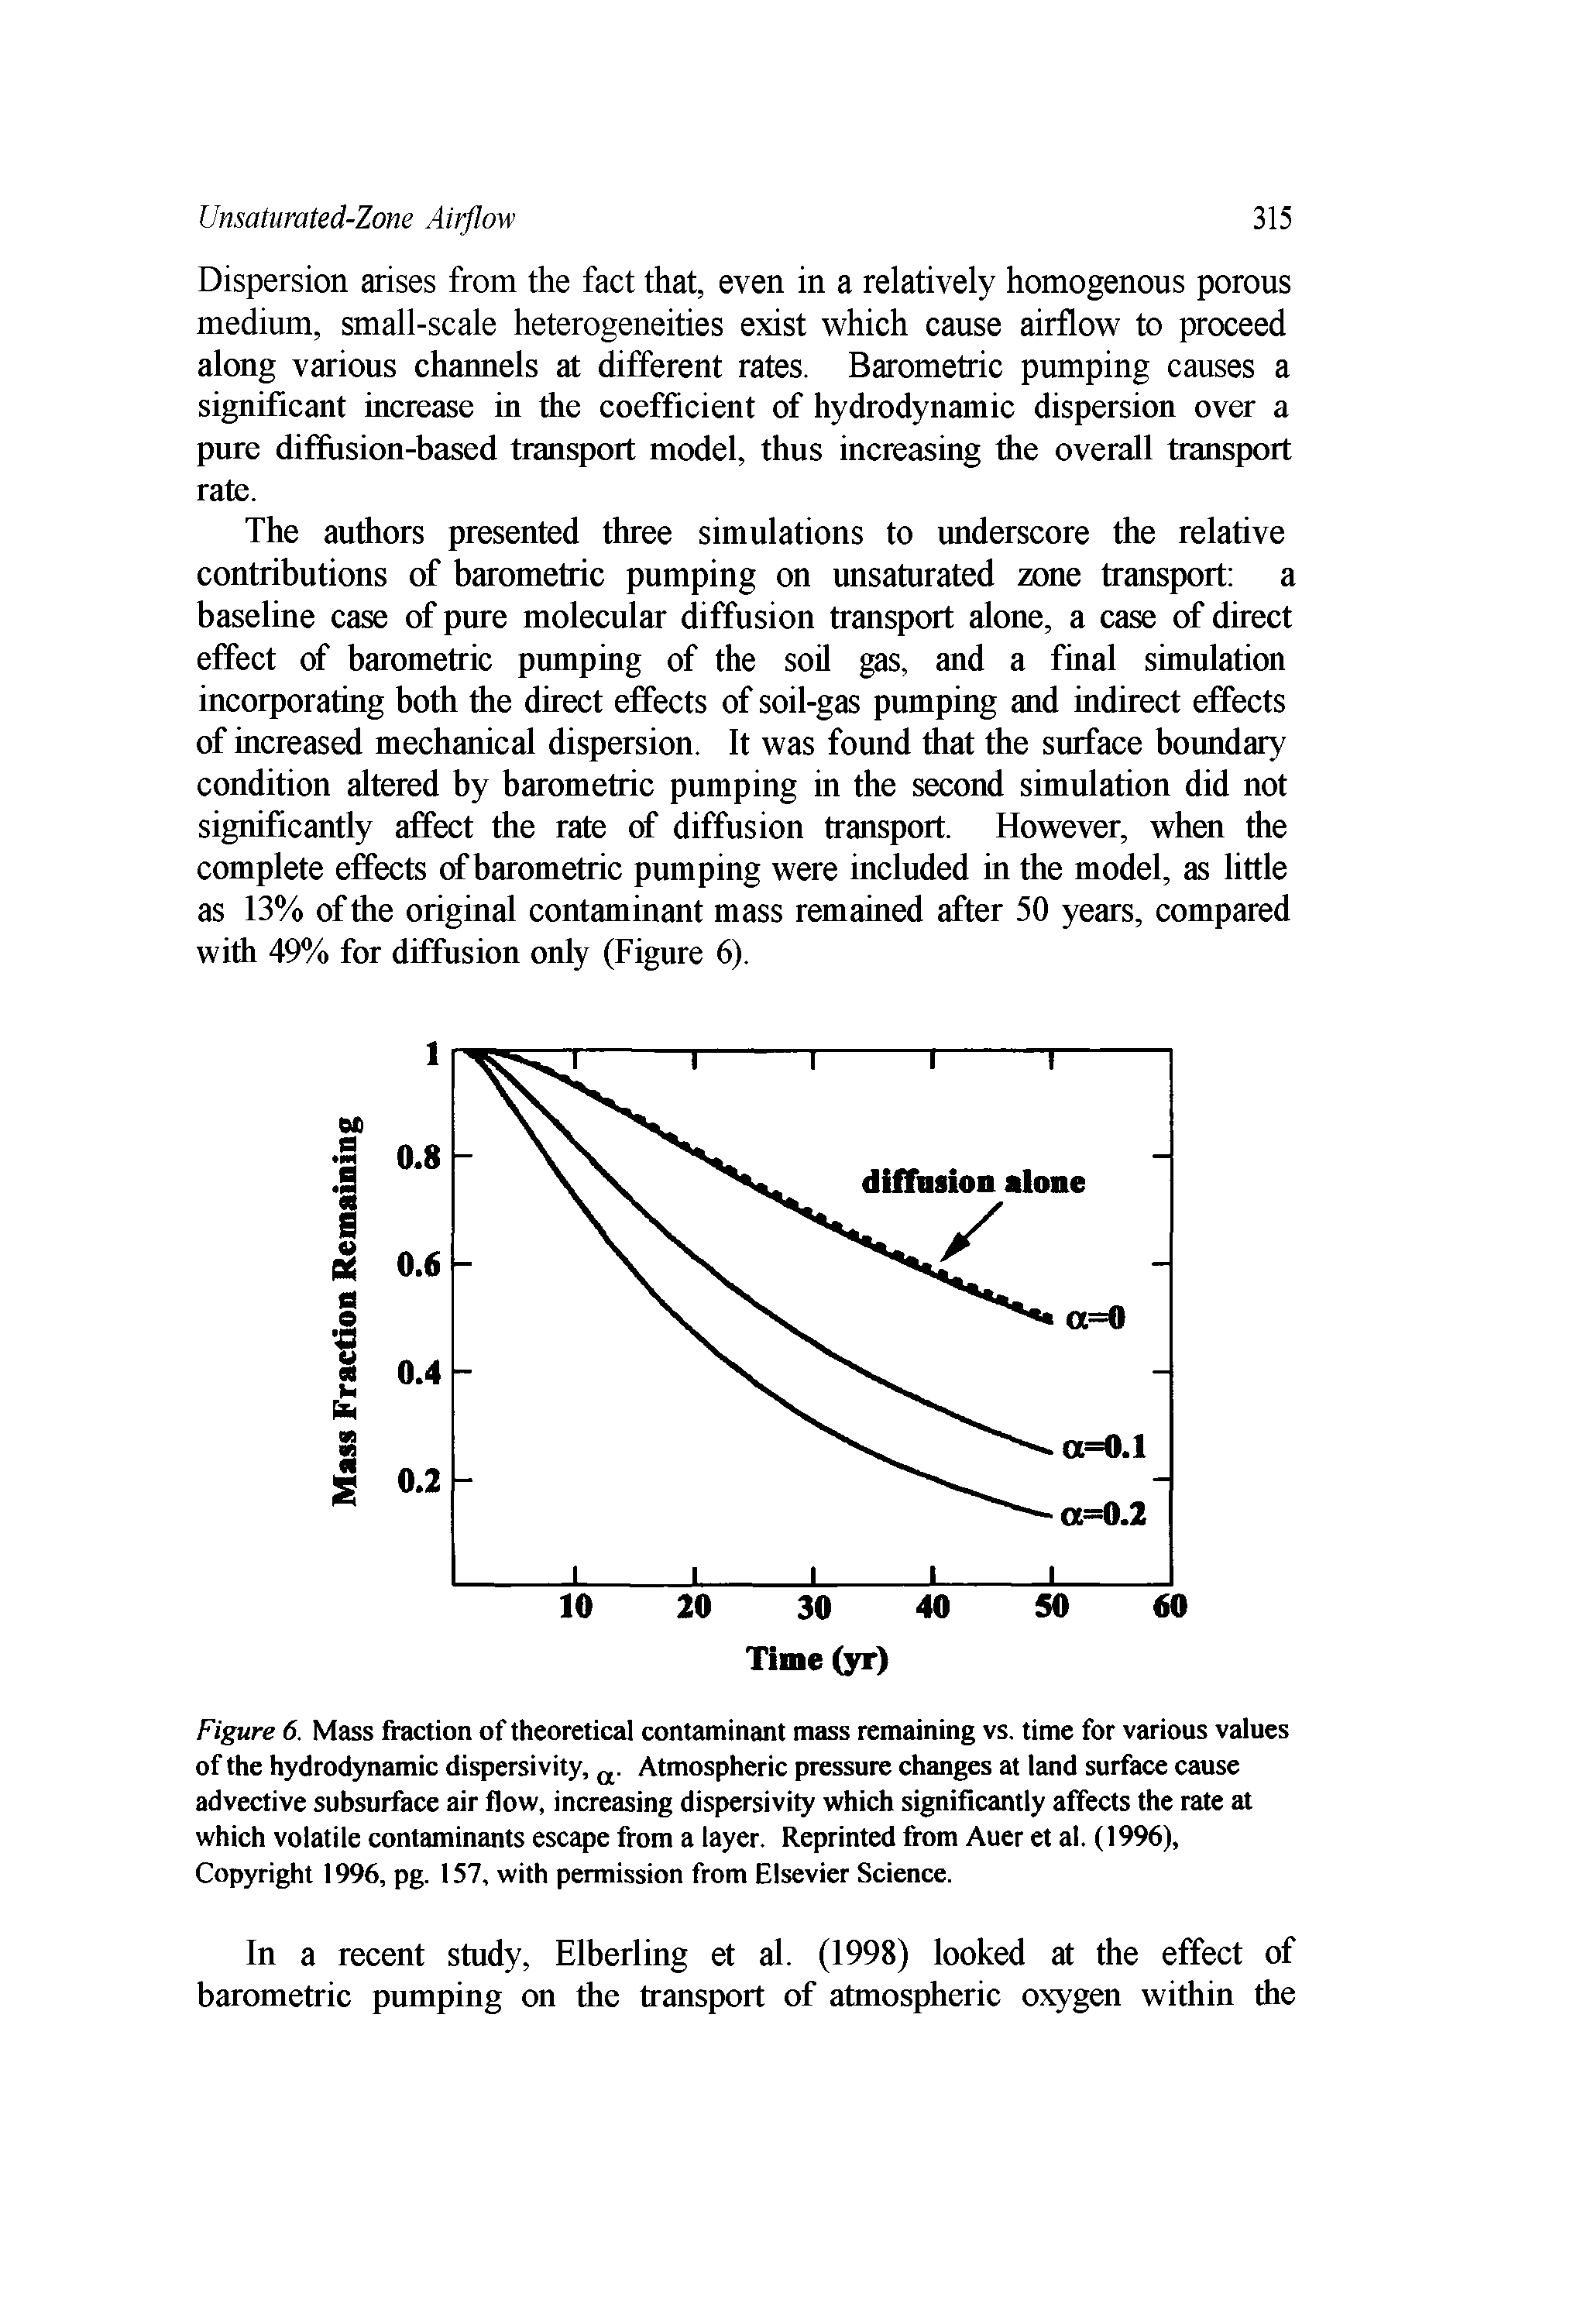 Figure 6. Mass fraction of theoretical contaminant mass remaining vs. time for various values of the hydrodynamic dispersivity, a. Atmospheric pressure changes at land surface cause advective subsurface air flow, increasing dispersivity which significantly affects the rate at which volatile contaminants escape from a layer. Reprinted from Auer et al. (1996), Copyright 1996, pg. 157, with permission from Elsevier Science.